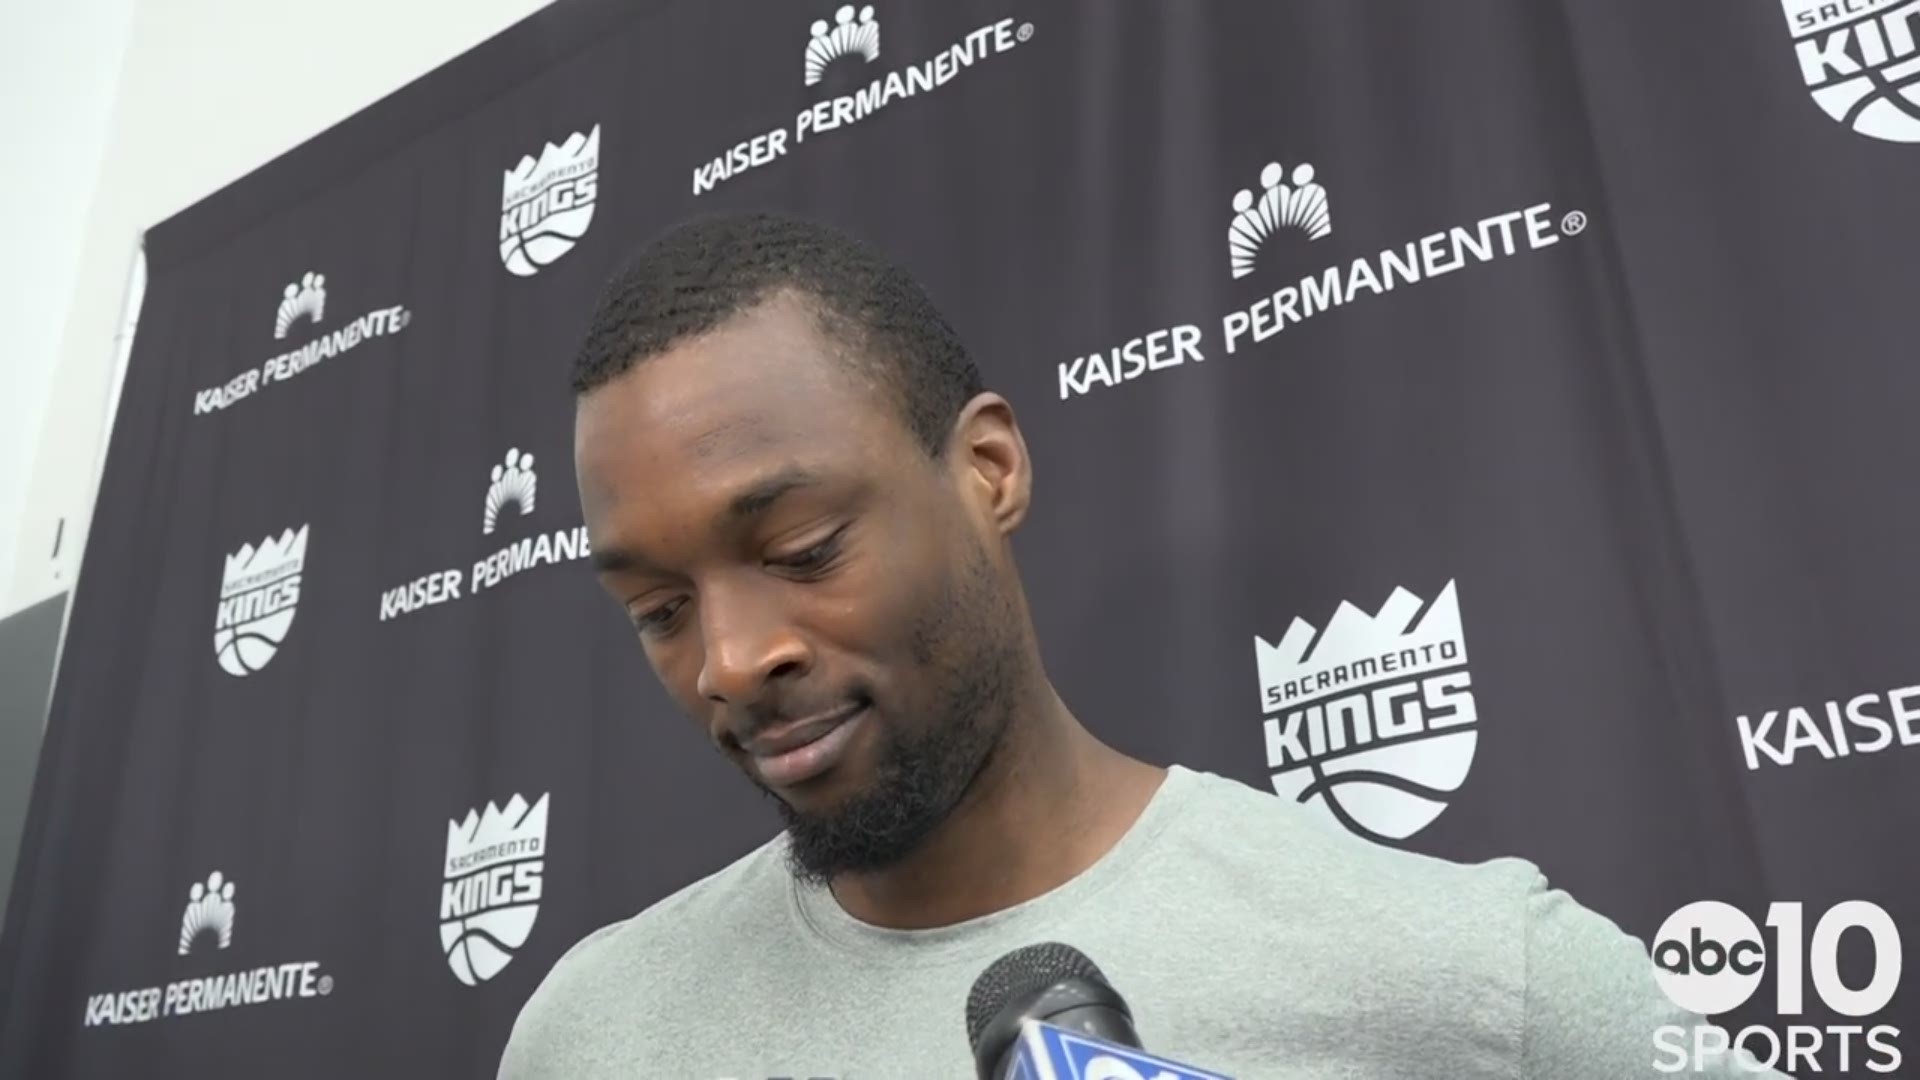 Sacramento Kings SF Harrison Barnes reflects on Thursday's preseason victory over the Phoenix Suns and what improvements he sees being made with the team.